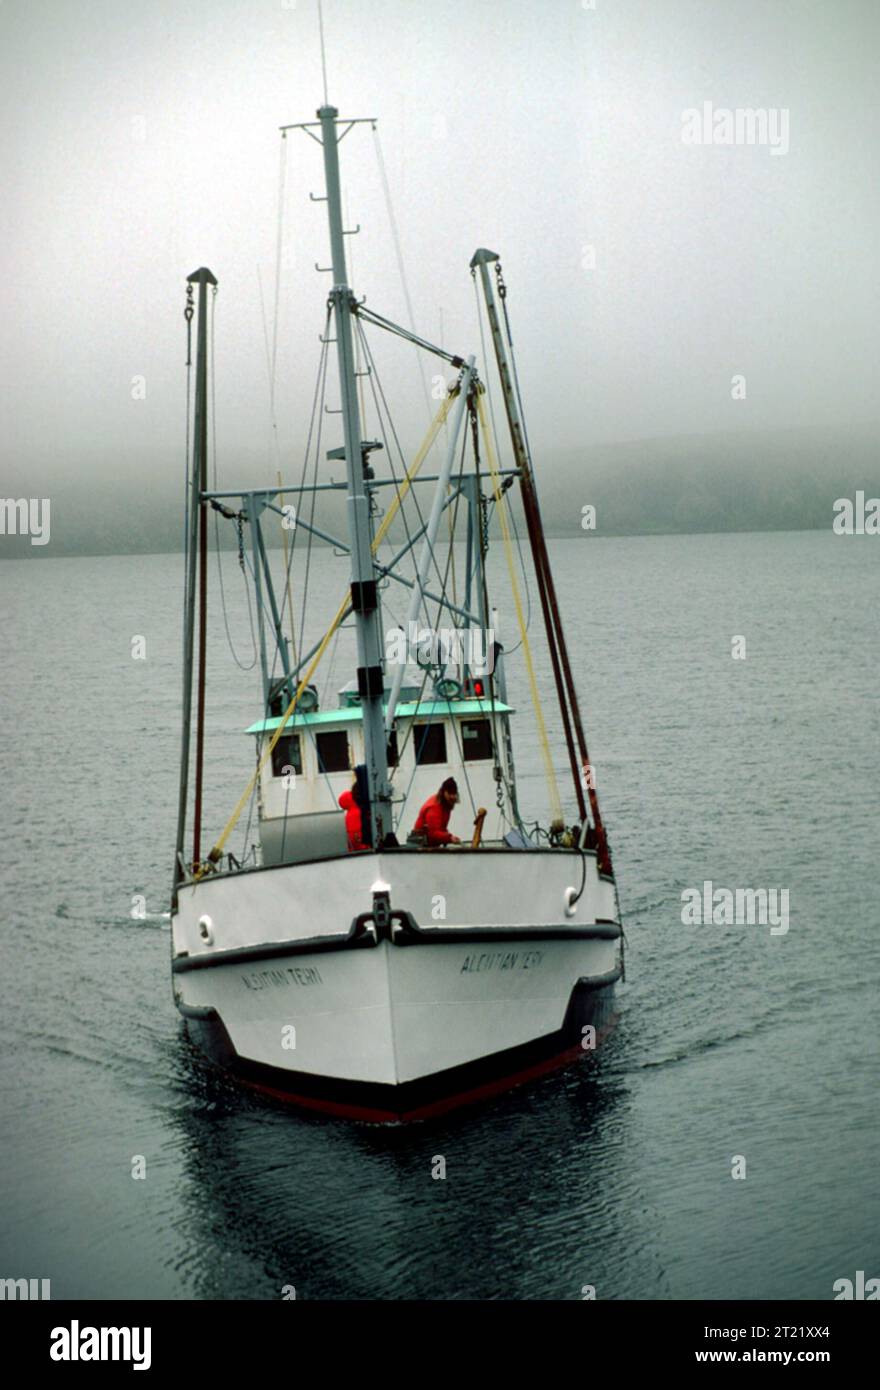 This image was taken in Constantine Harbor at the Aleutian island of Amchitka. Subjects: Transportation; Boats; Research Vessels; Alaska Maritime National Wildlife Refuge; Alaska. Stock Photo